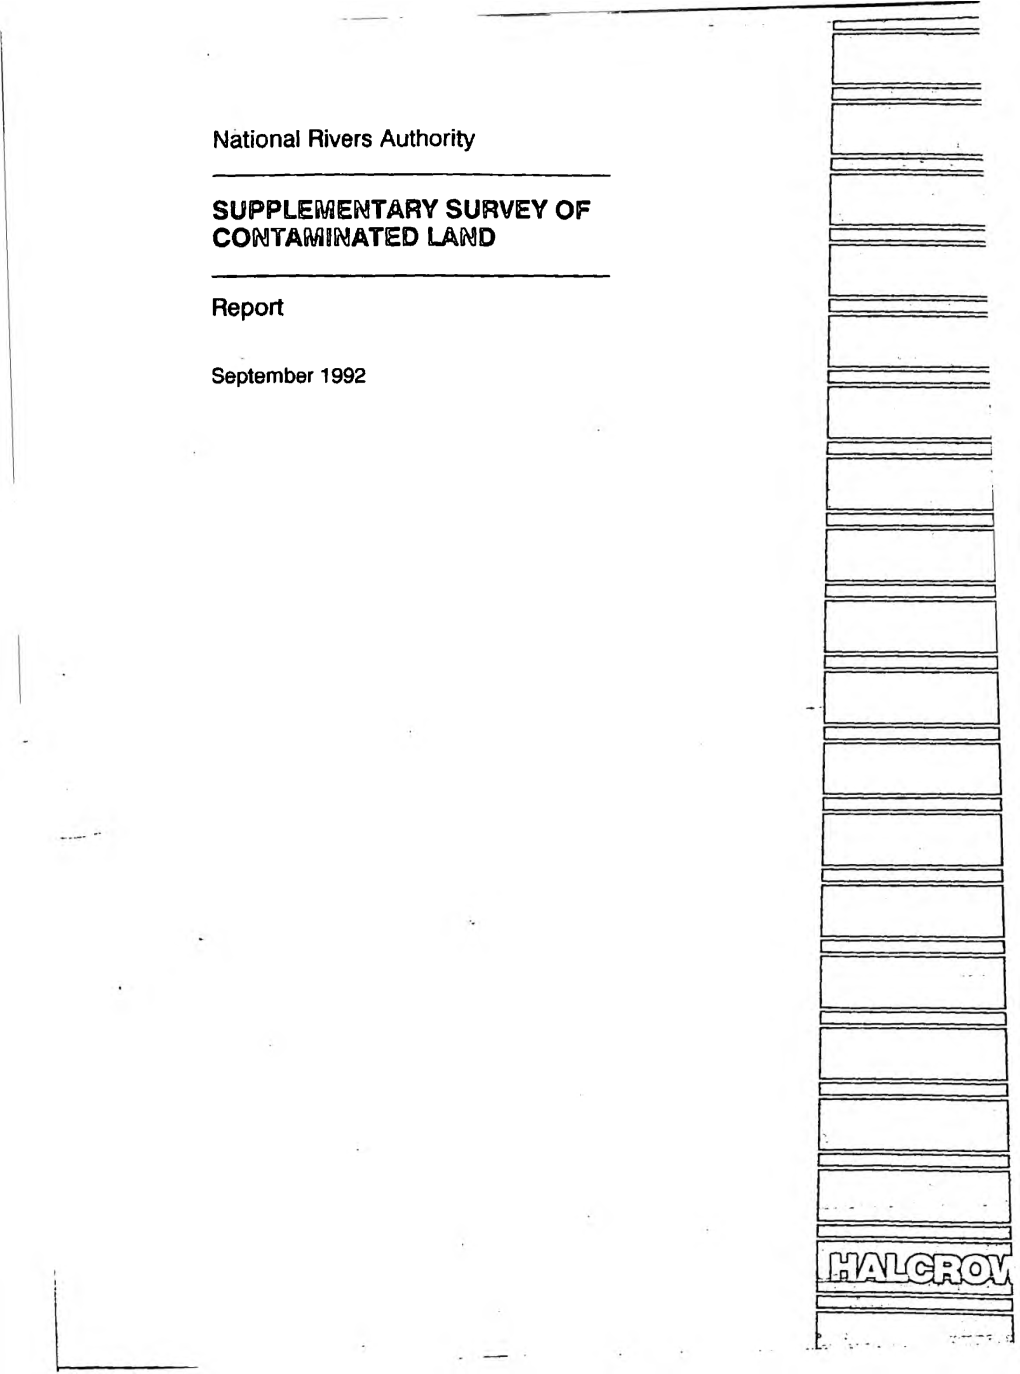 SUPPLEMENTARY SURVEY of CONTAMINATED LAND Report